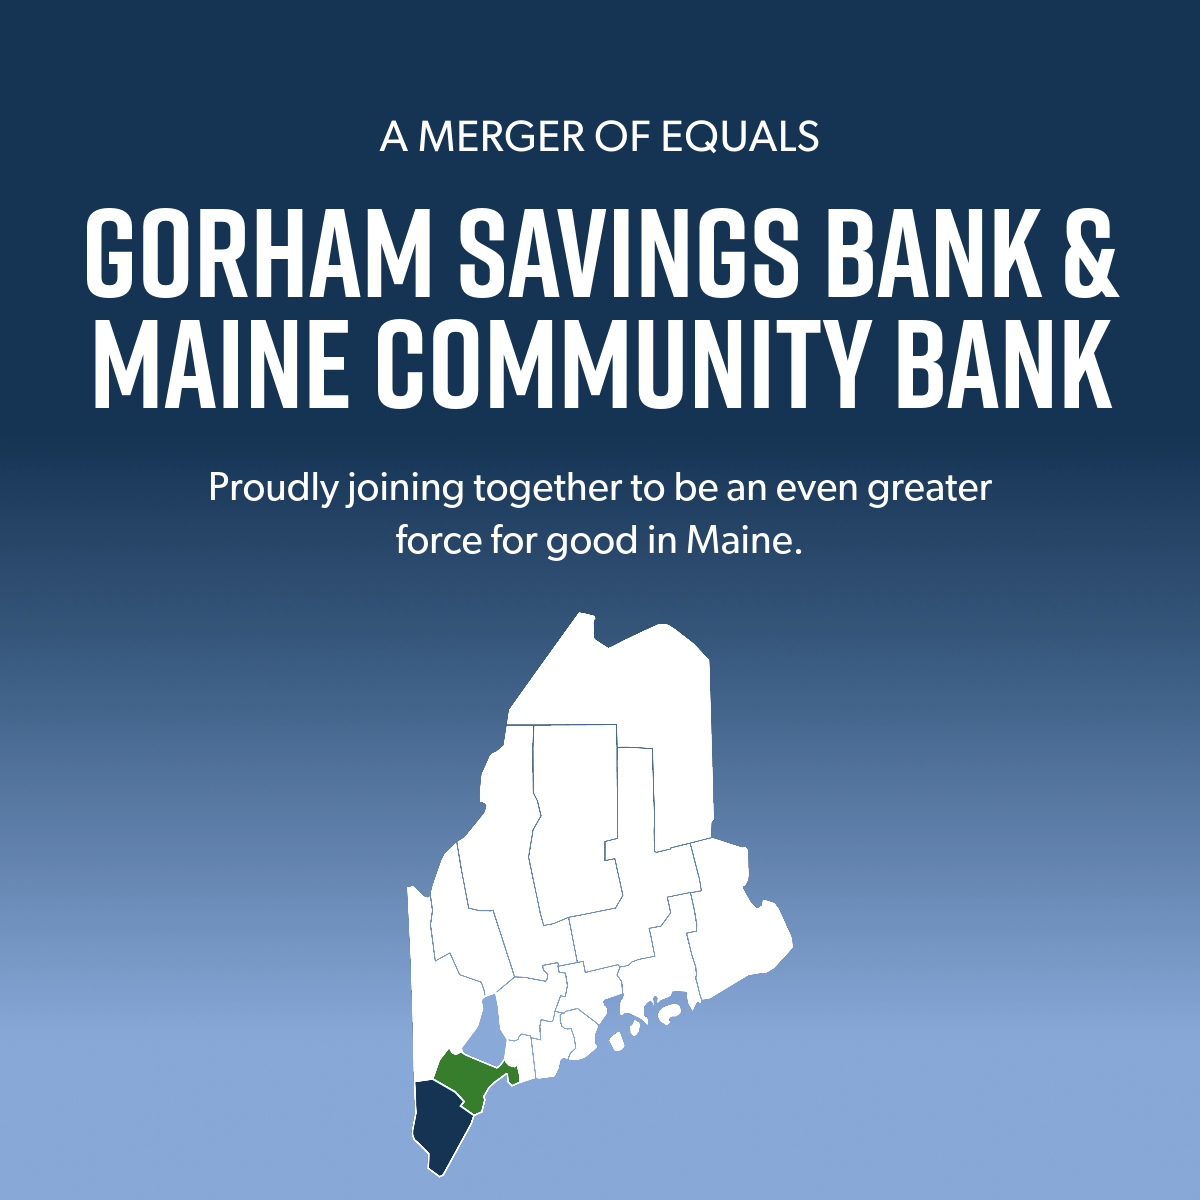 Gorham Savings Bank and Maine Community Bank to combine in a merger of equals